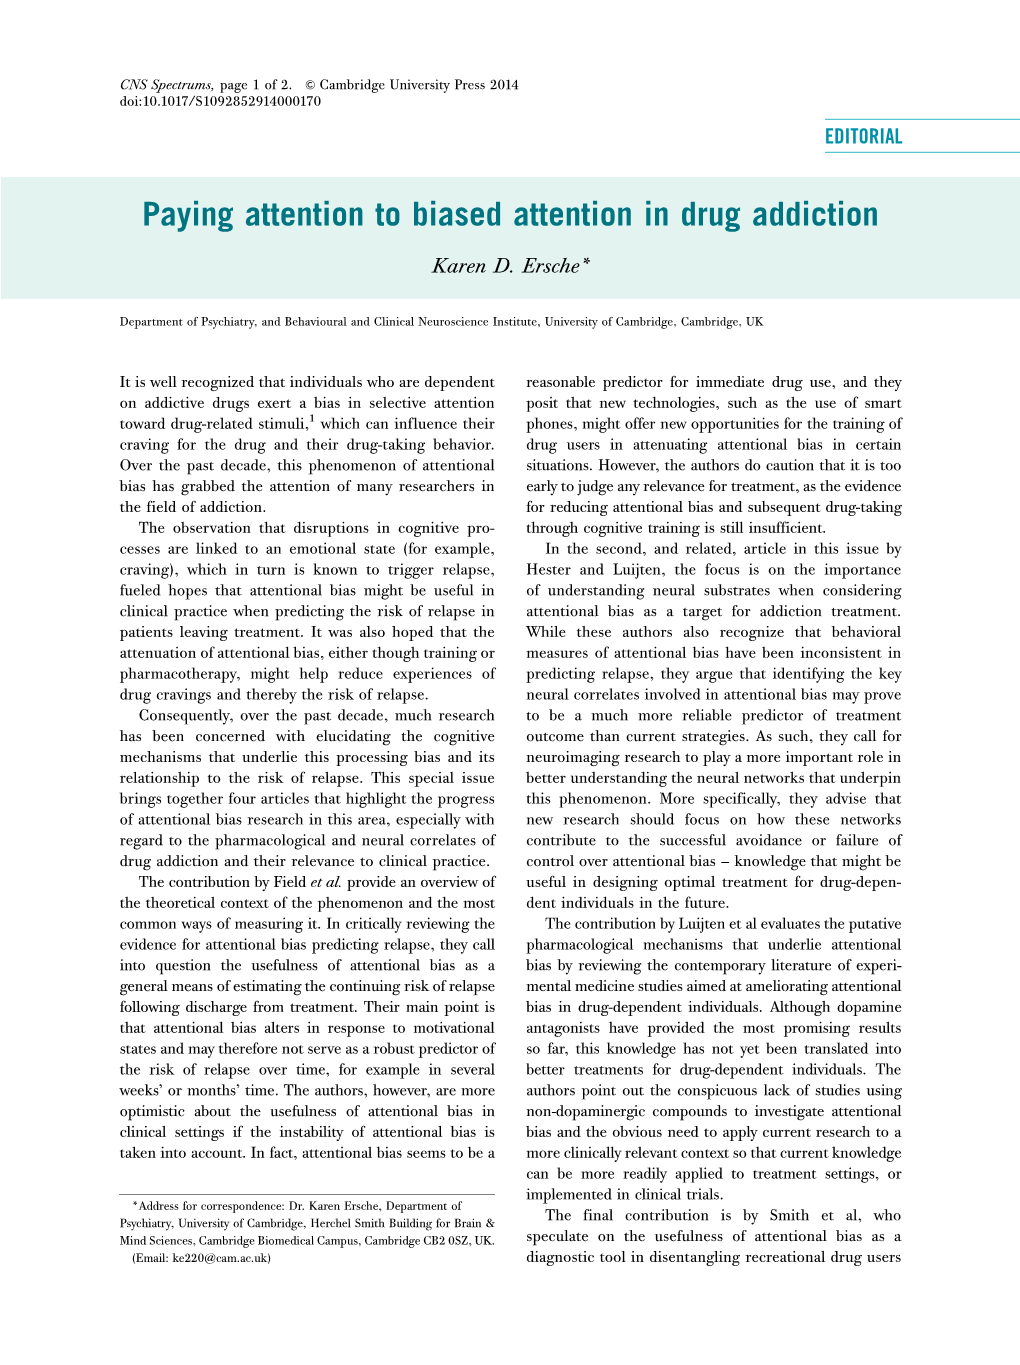 Paying Attention to Biased Attention in Drug Addiction